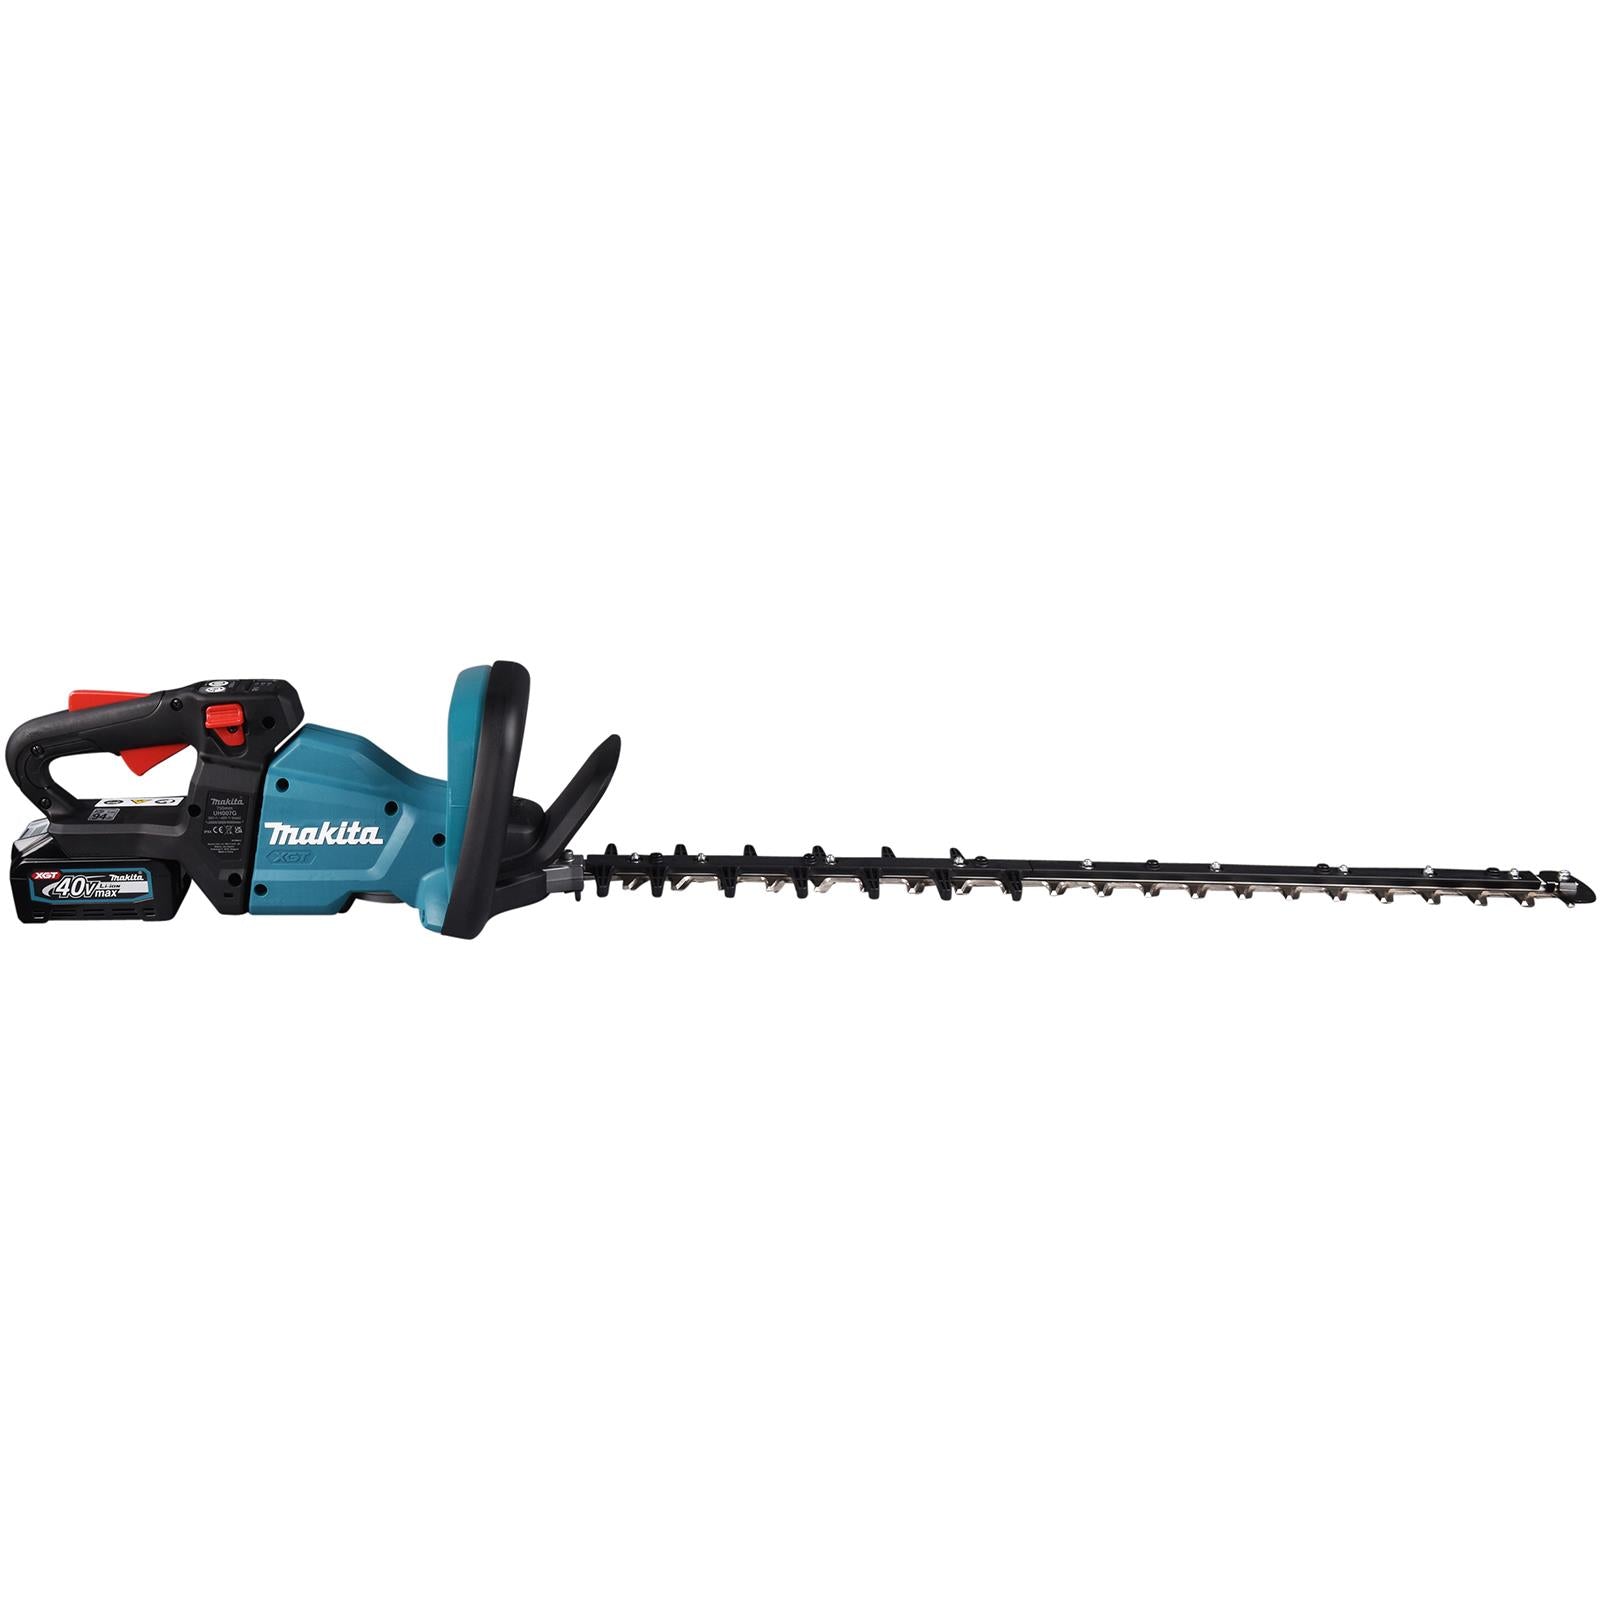 Makita Hedge Trimmer Kit 75cm 40V XGT Li-ion Brushless Cordless 2 x 2.5Ah Battery and Rapid Charger Garden Bush Cutter Cutting UH007GD201